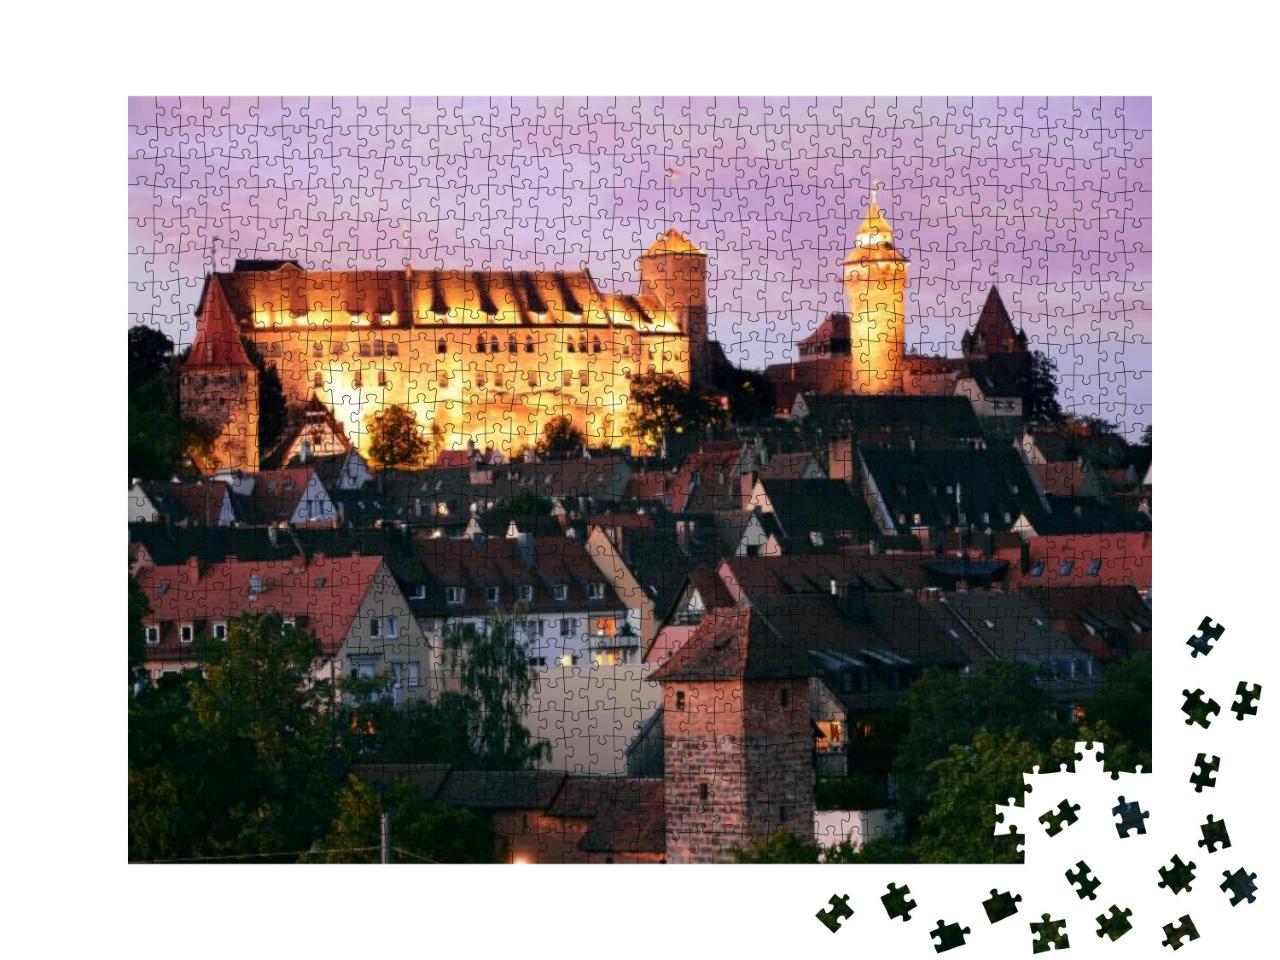 Illuminated Castle Kaiserburg in Nuremberg, Germany with... Jigsaw Puzzle with 1000 pieces